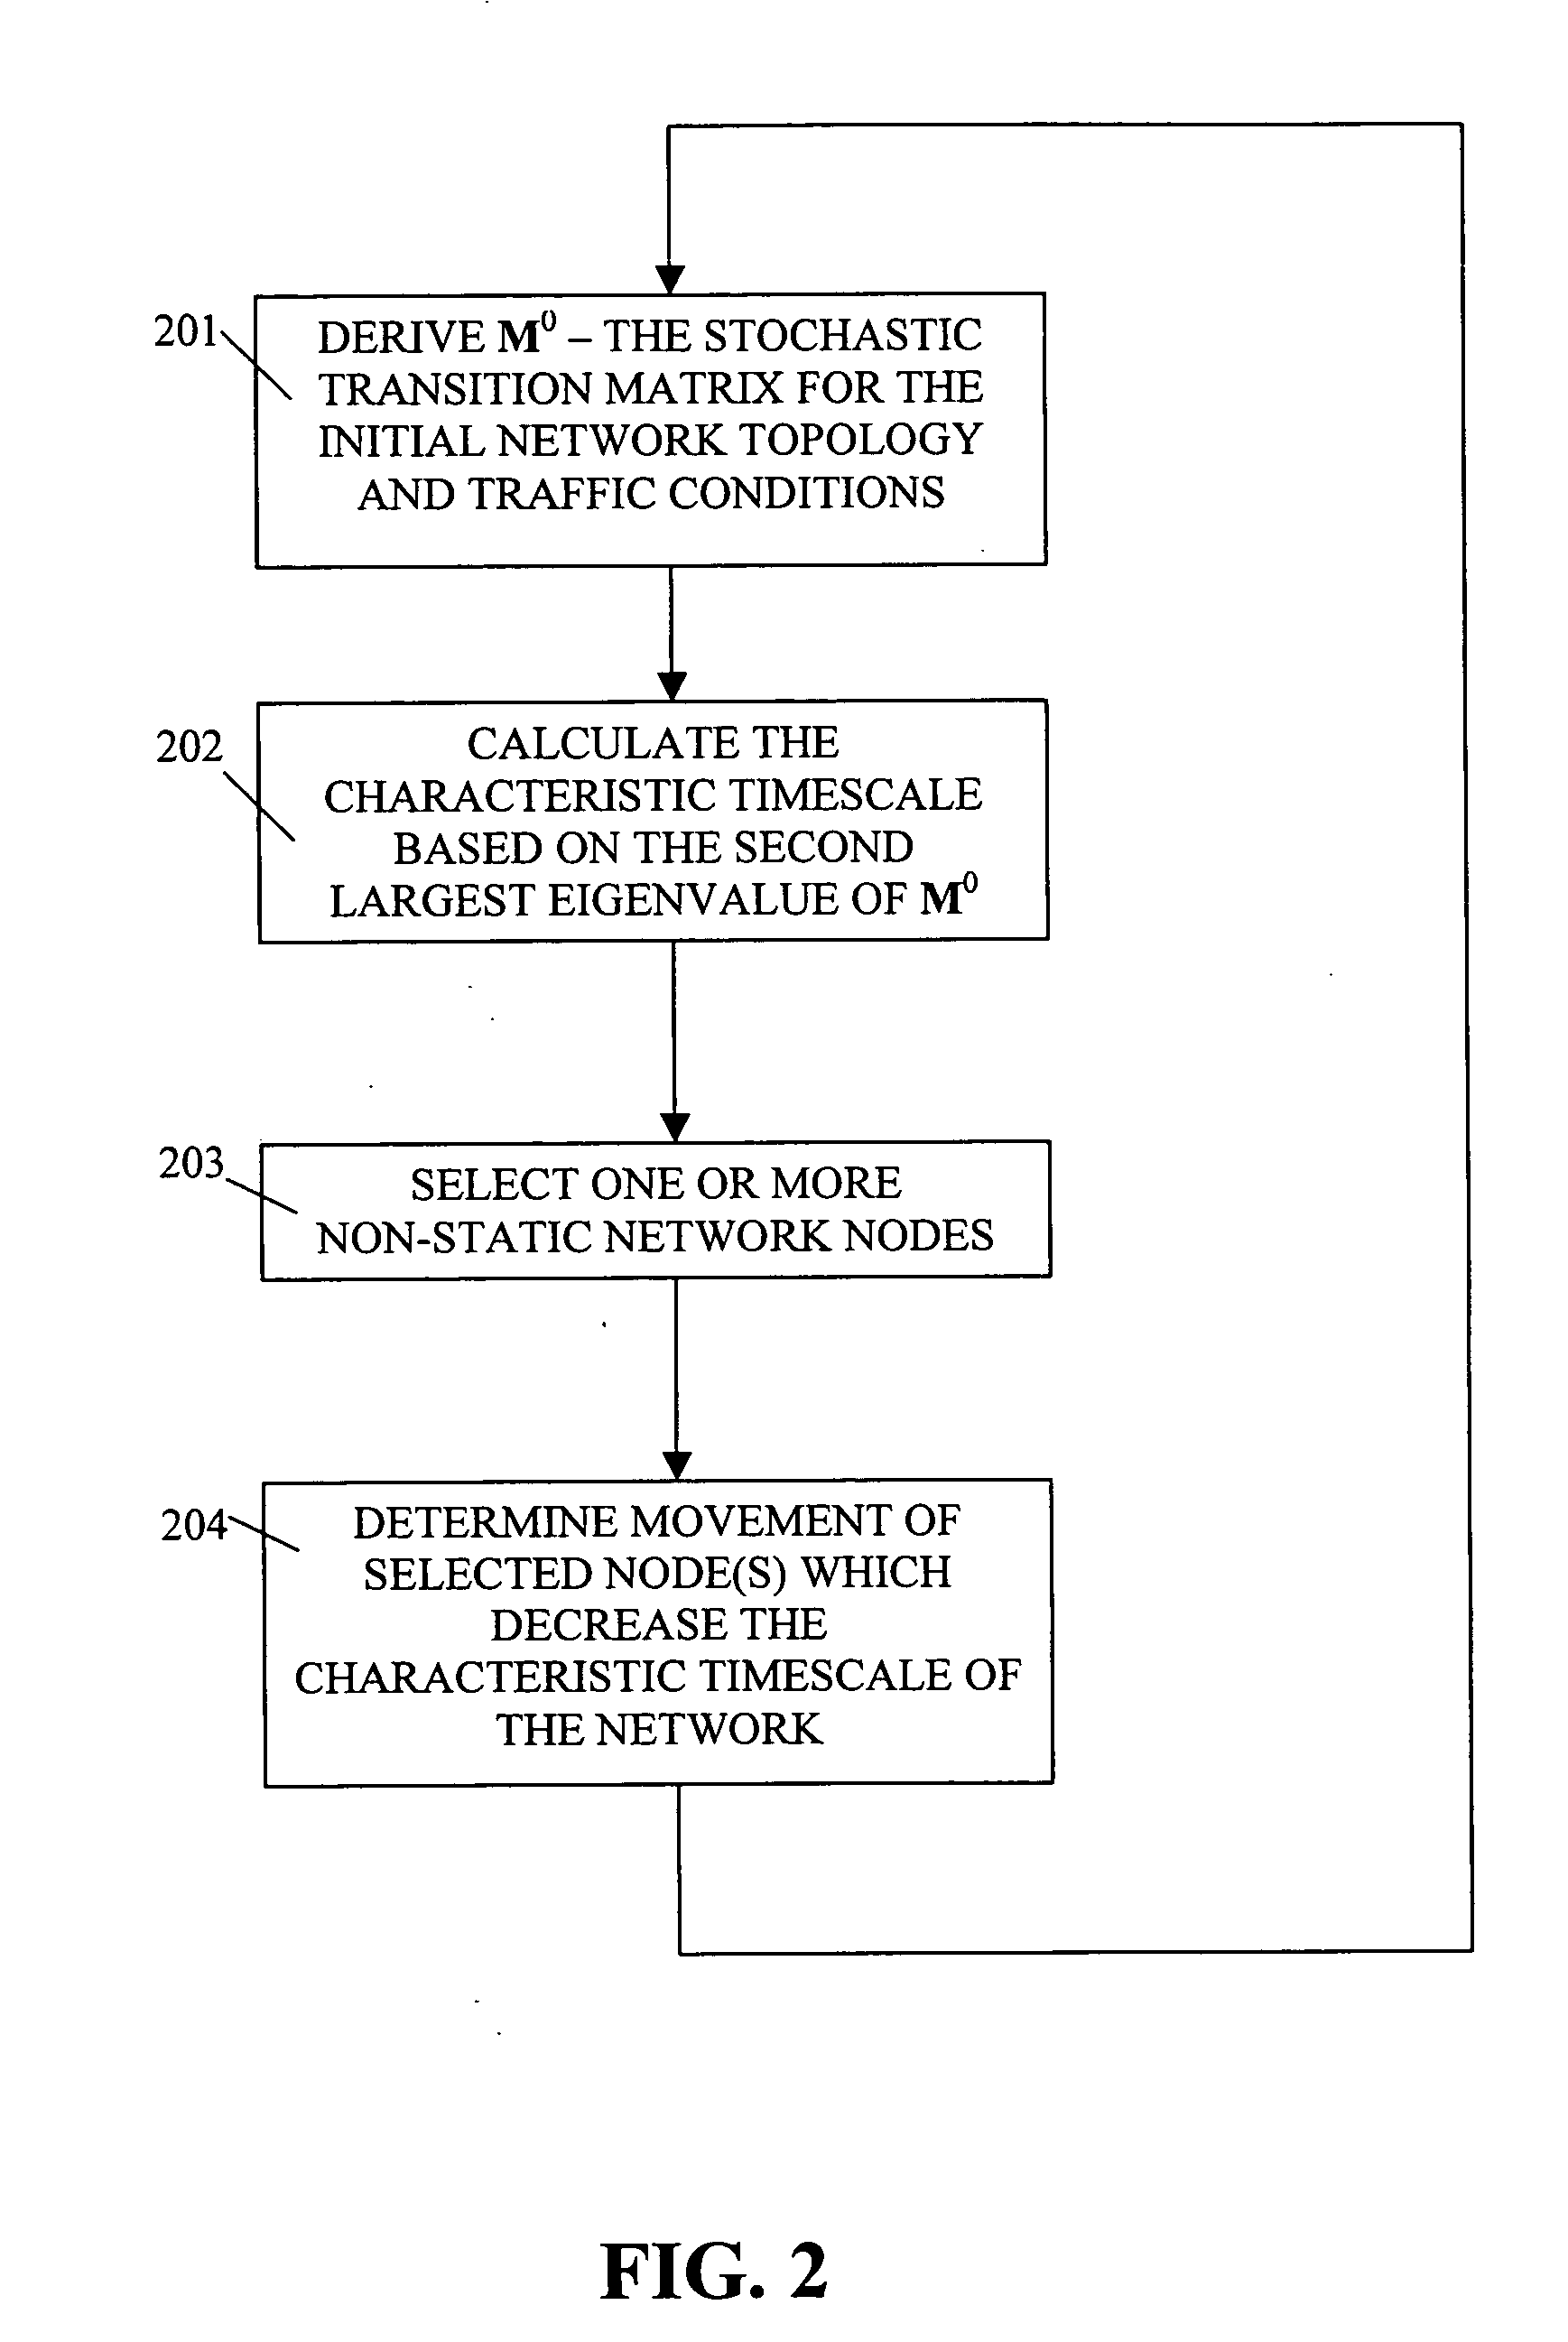 Method and apparatus for dynamically reducing end-to-end delay in multi-hop wireless networks in response to changing traffic conditions